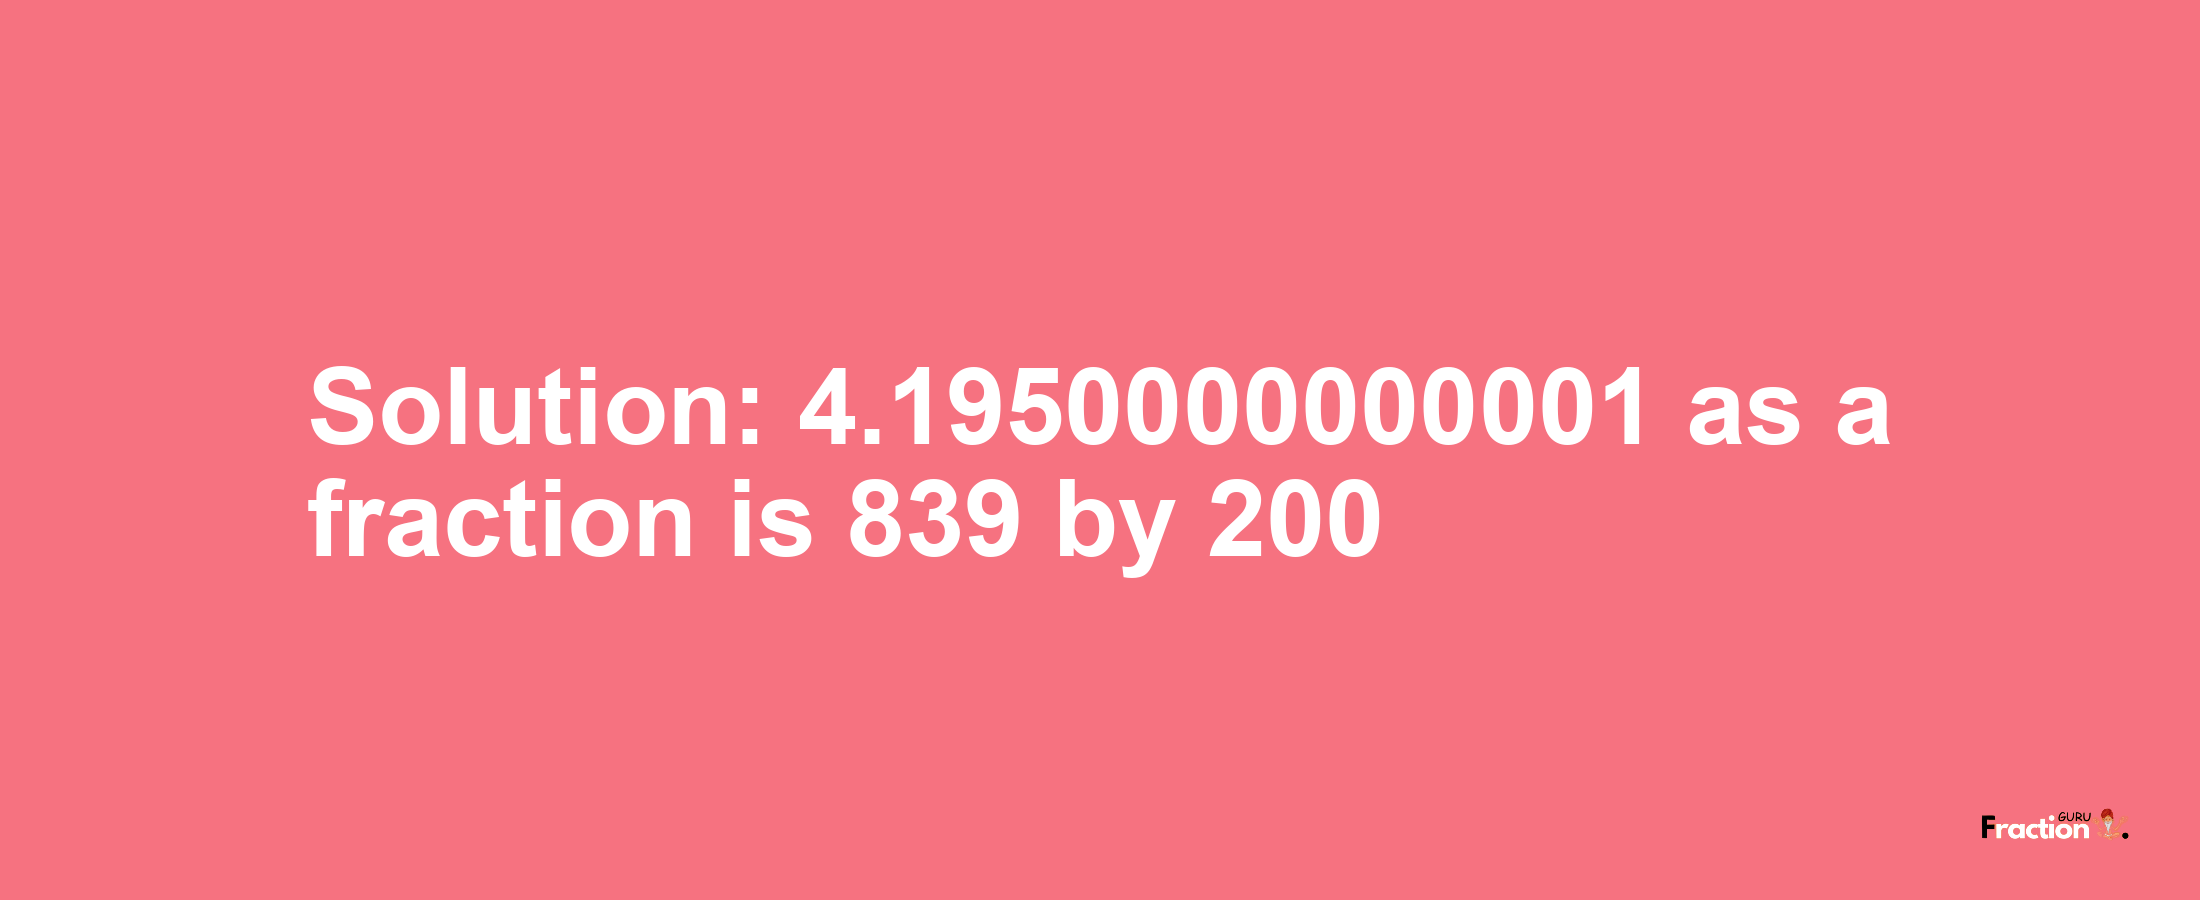 Solution:4.1950000000001 as a fraction is 839/200